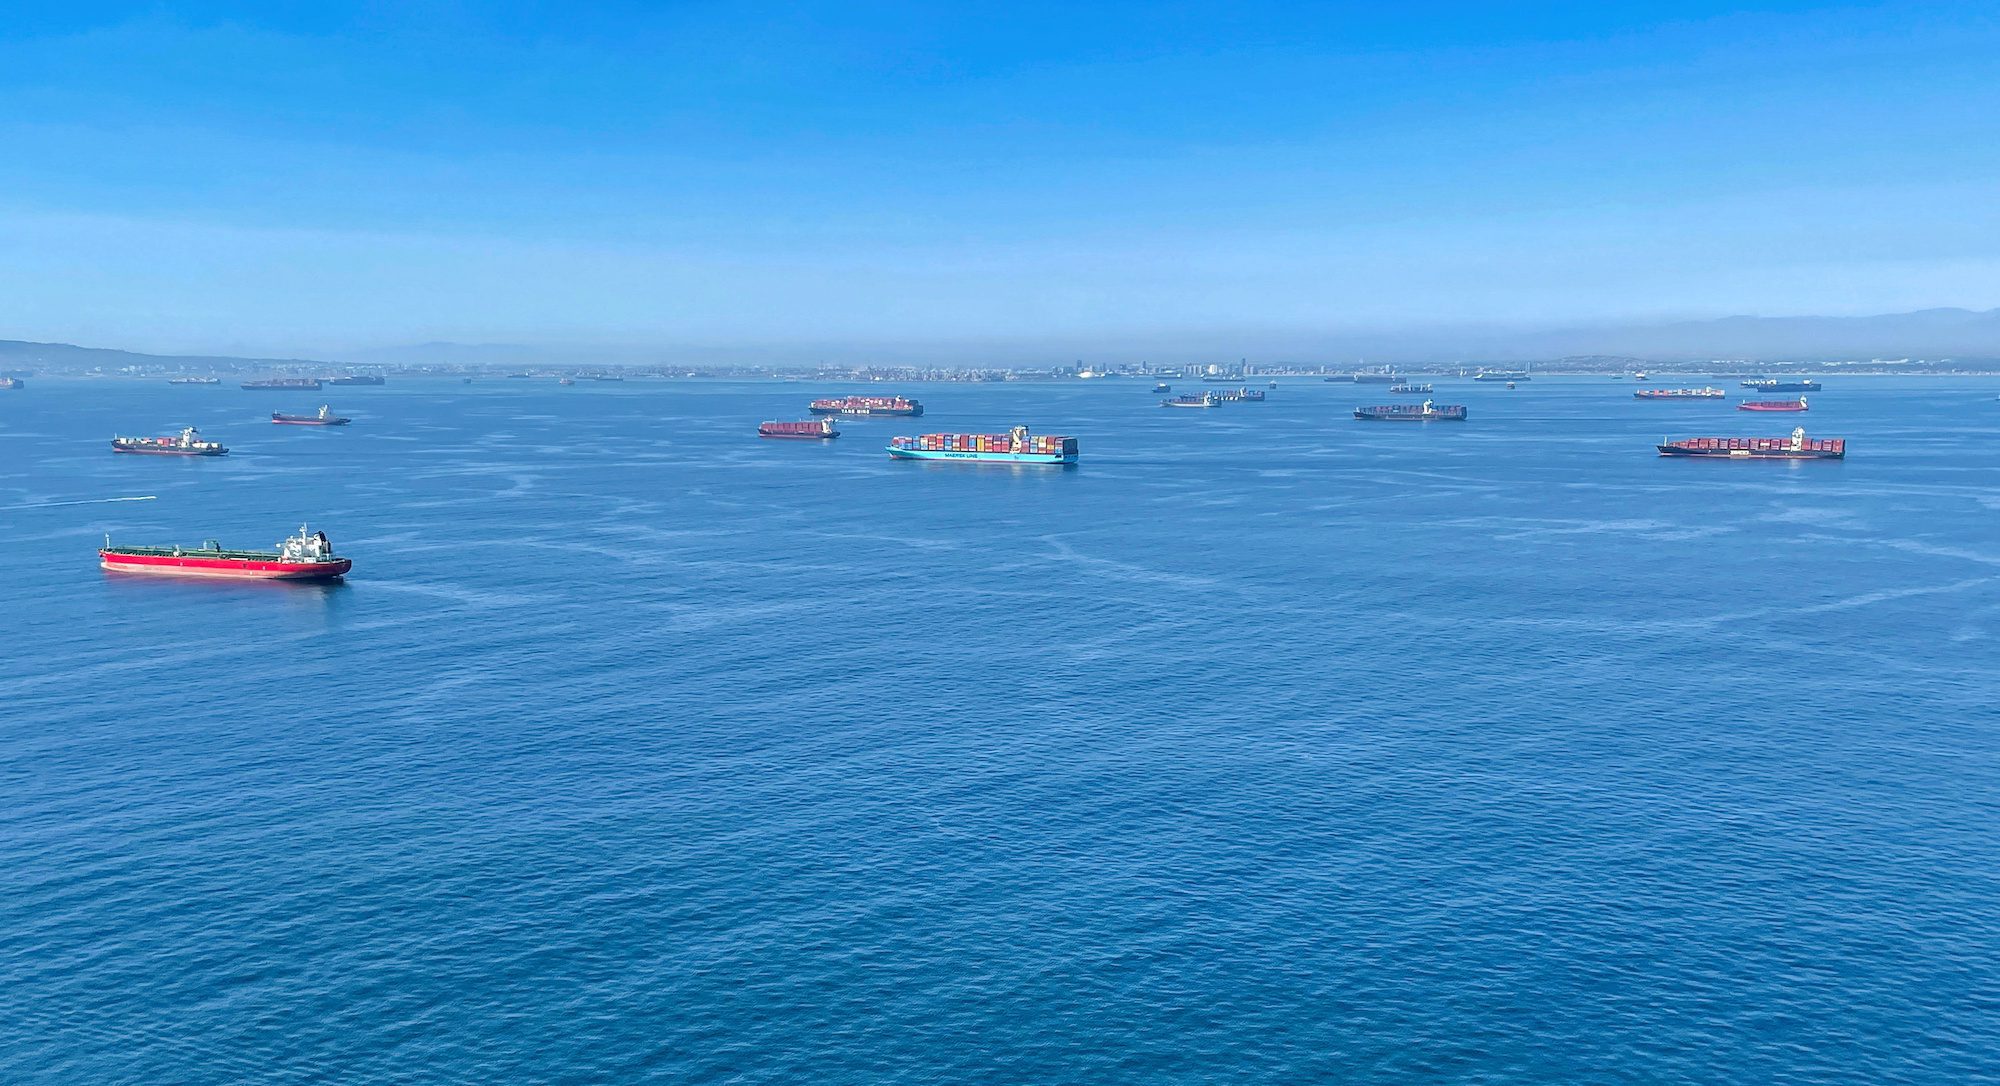 A Record Number of Ships Are Anchored Near the Pipeline Responsible for California’s Oil Spill: Could One Have Caused the Leak?